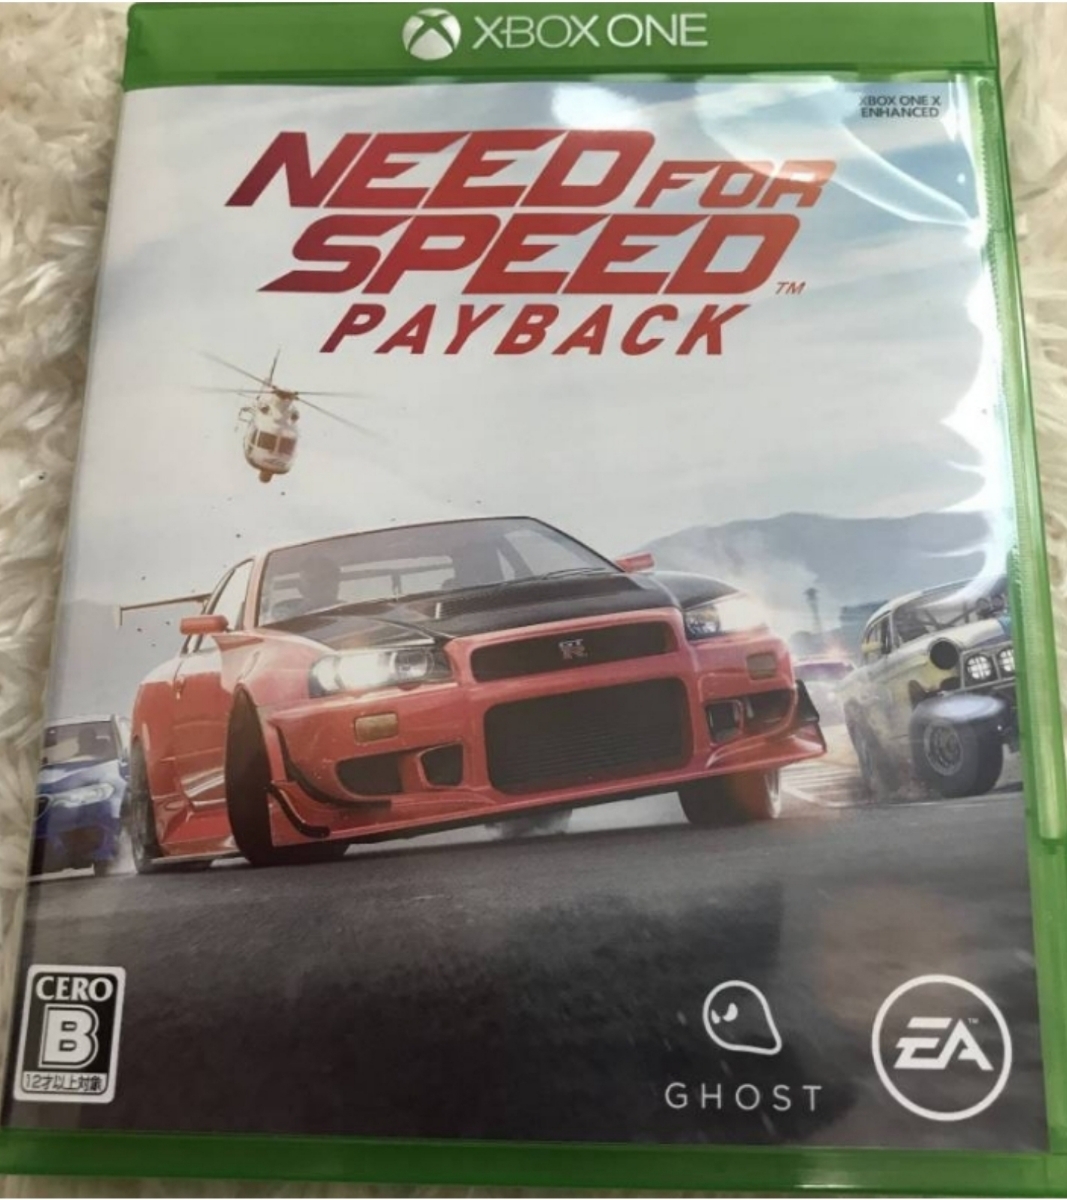 XBOX ONE Need for Speed Payback ニード・フォー・スピード ペイバック 美品1